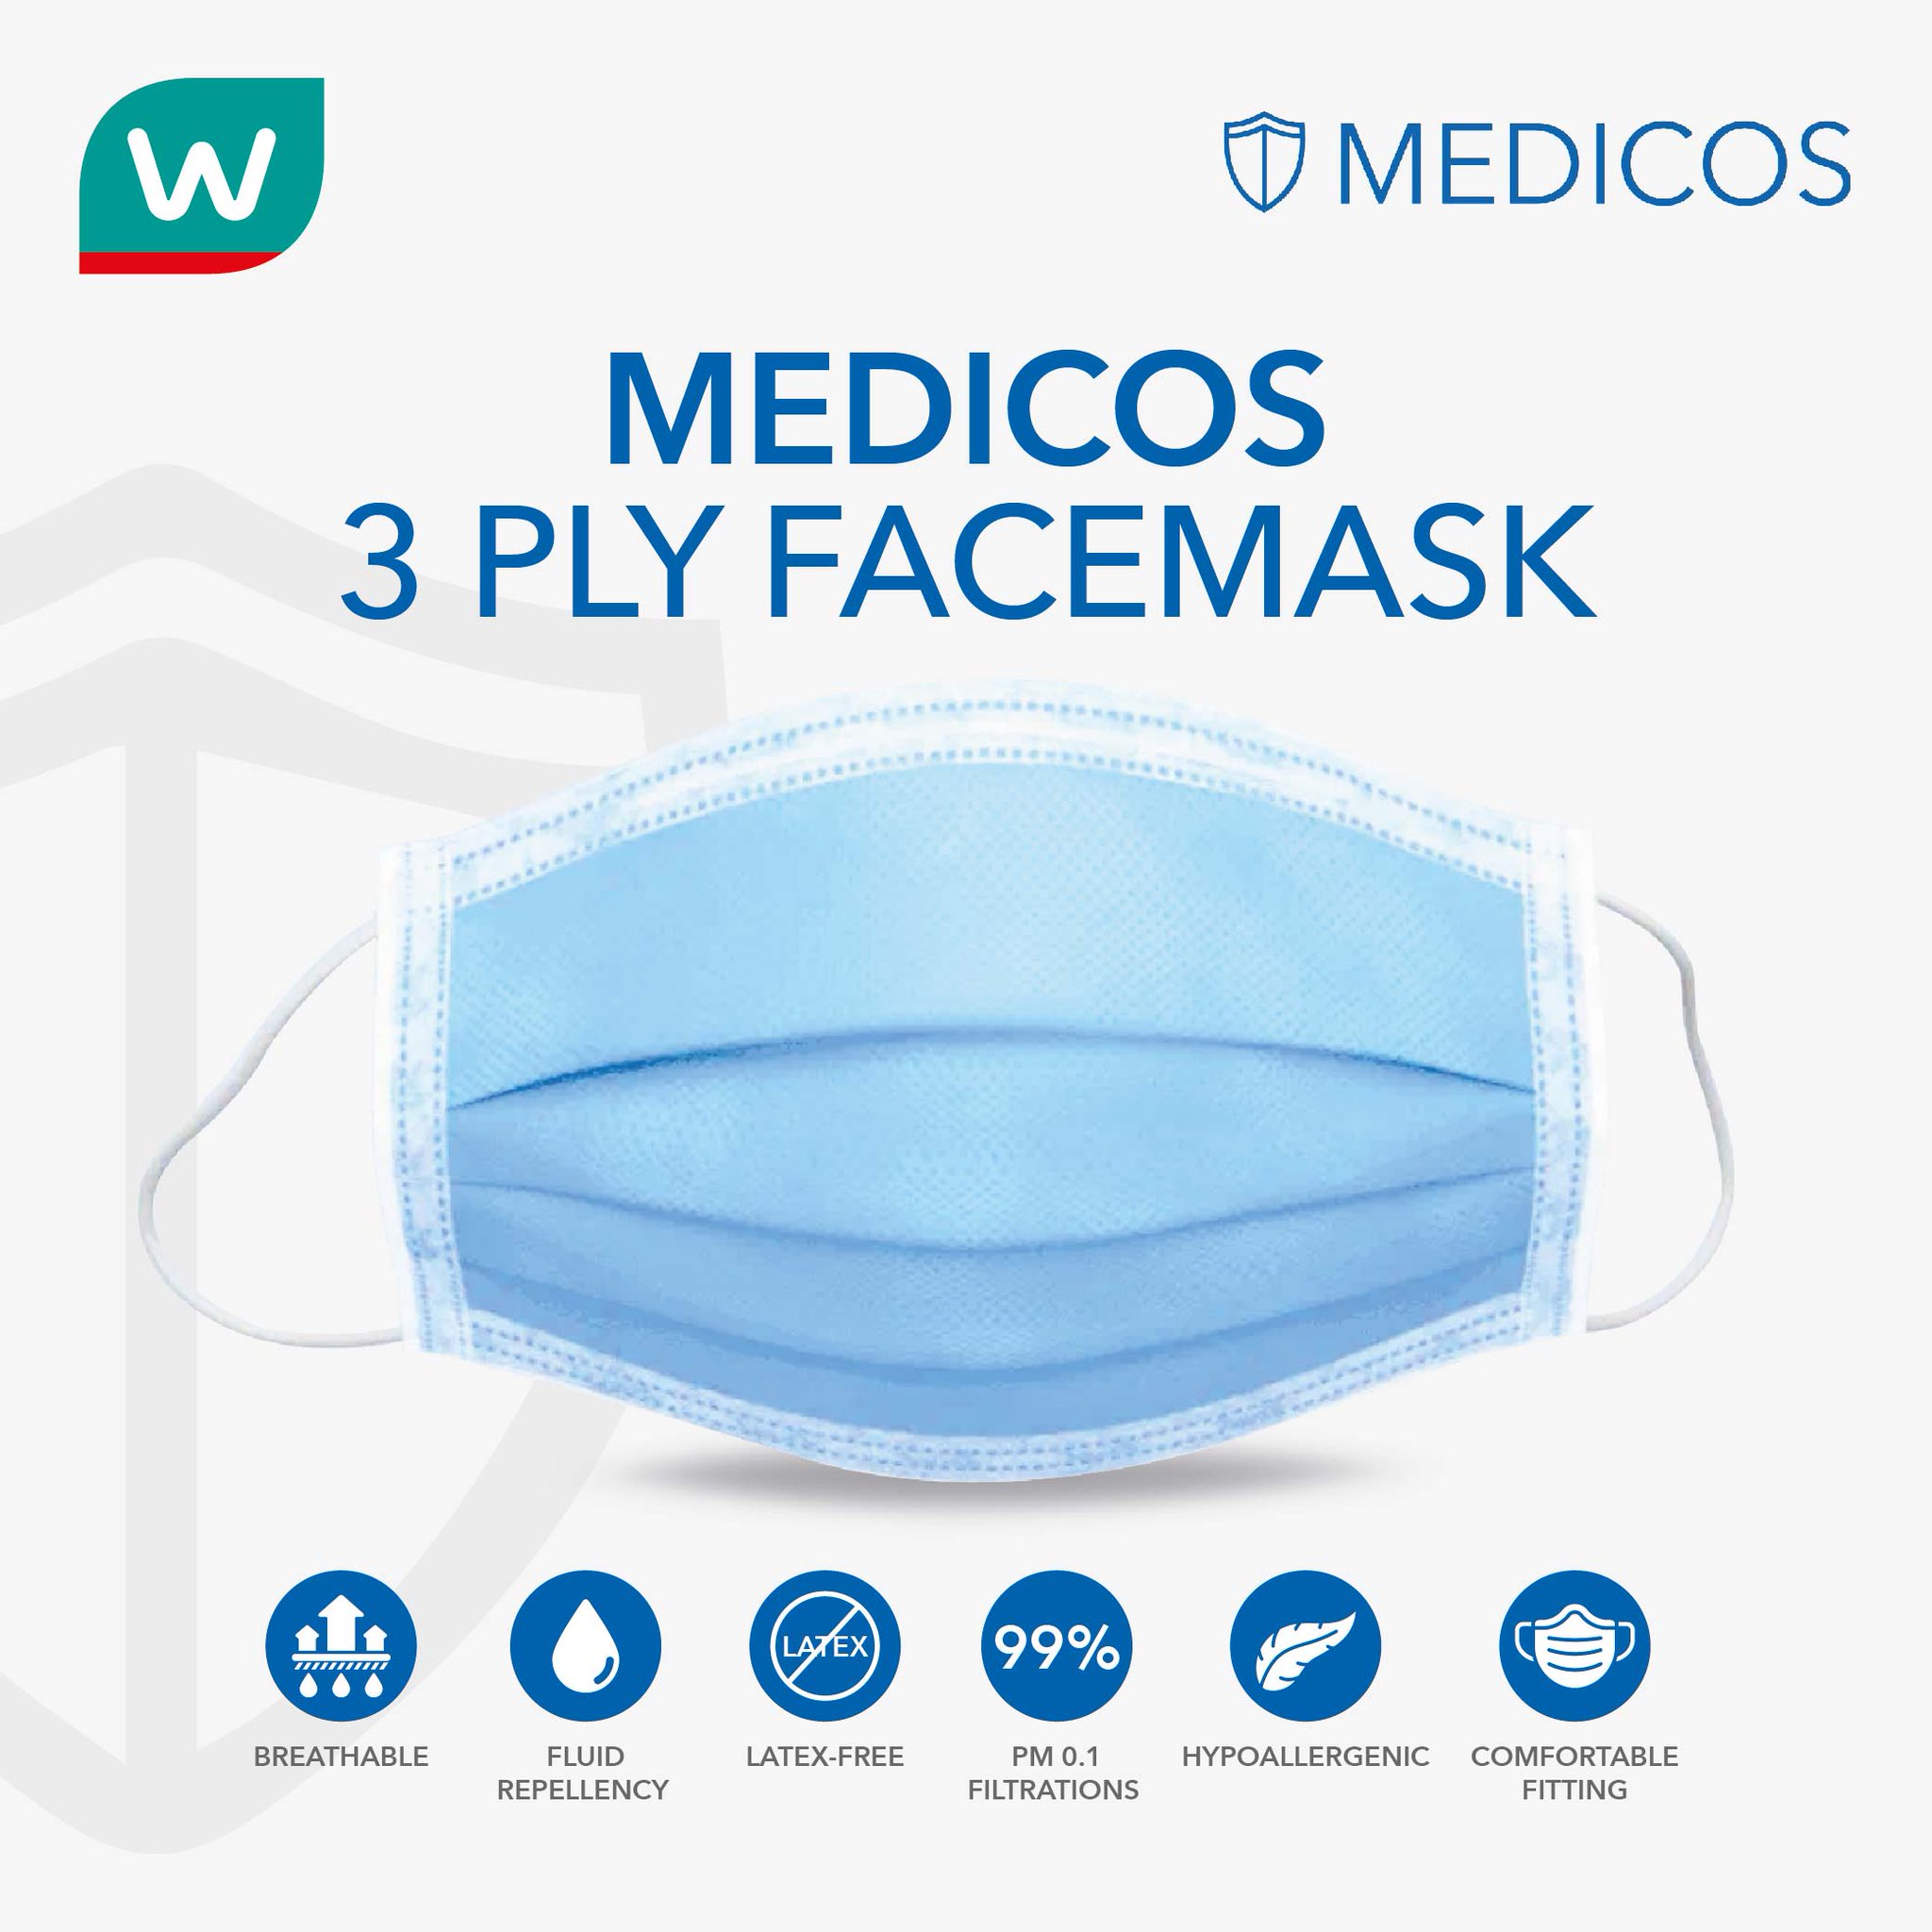 Watsons Malaysia On Twitter Choose Medicos 3 Ply Surgical Mask With 99 Pm 0 1 Filtrations To Help You To Stay Protected Shop Yours From Selected Watsonsmalaysia Stores Https T Co Opqeknotuv And Online